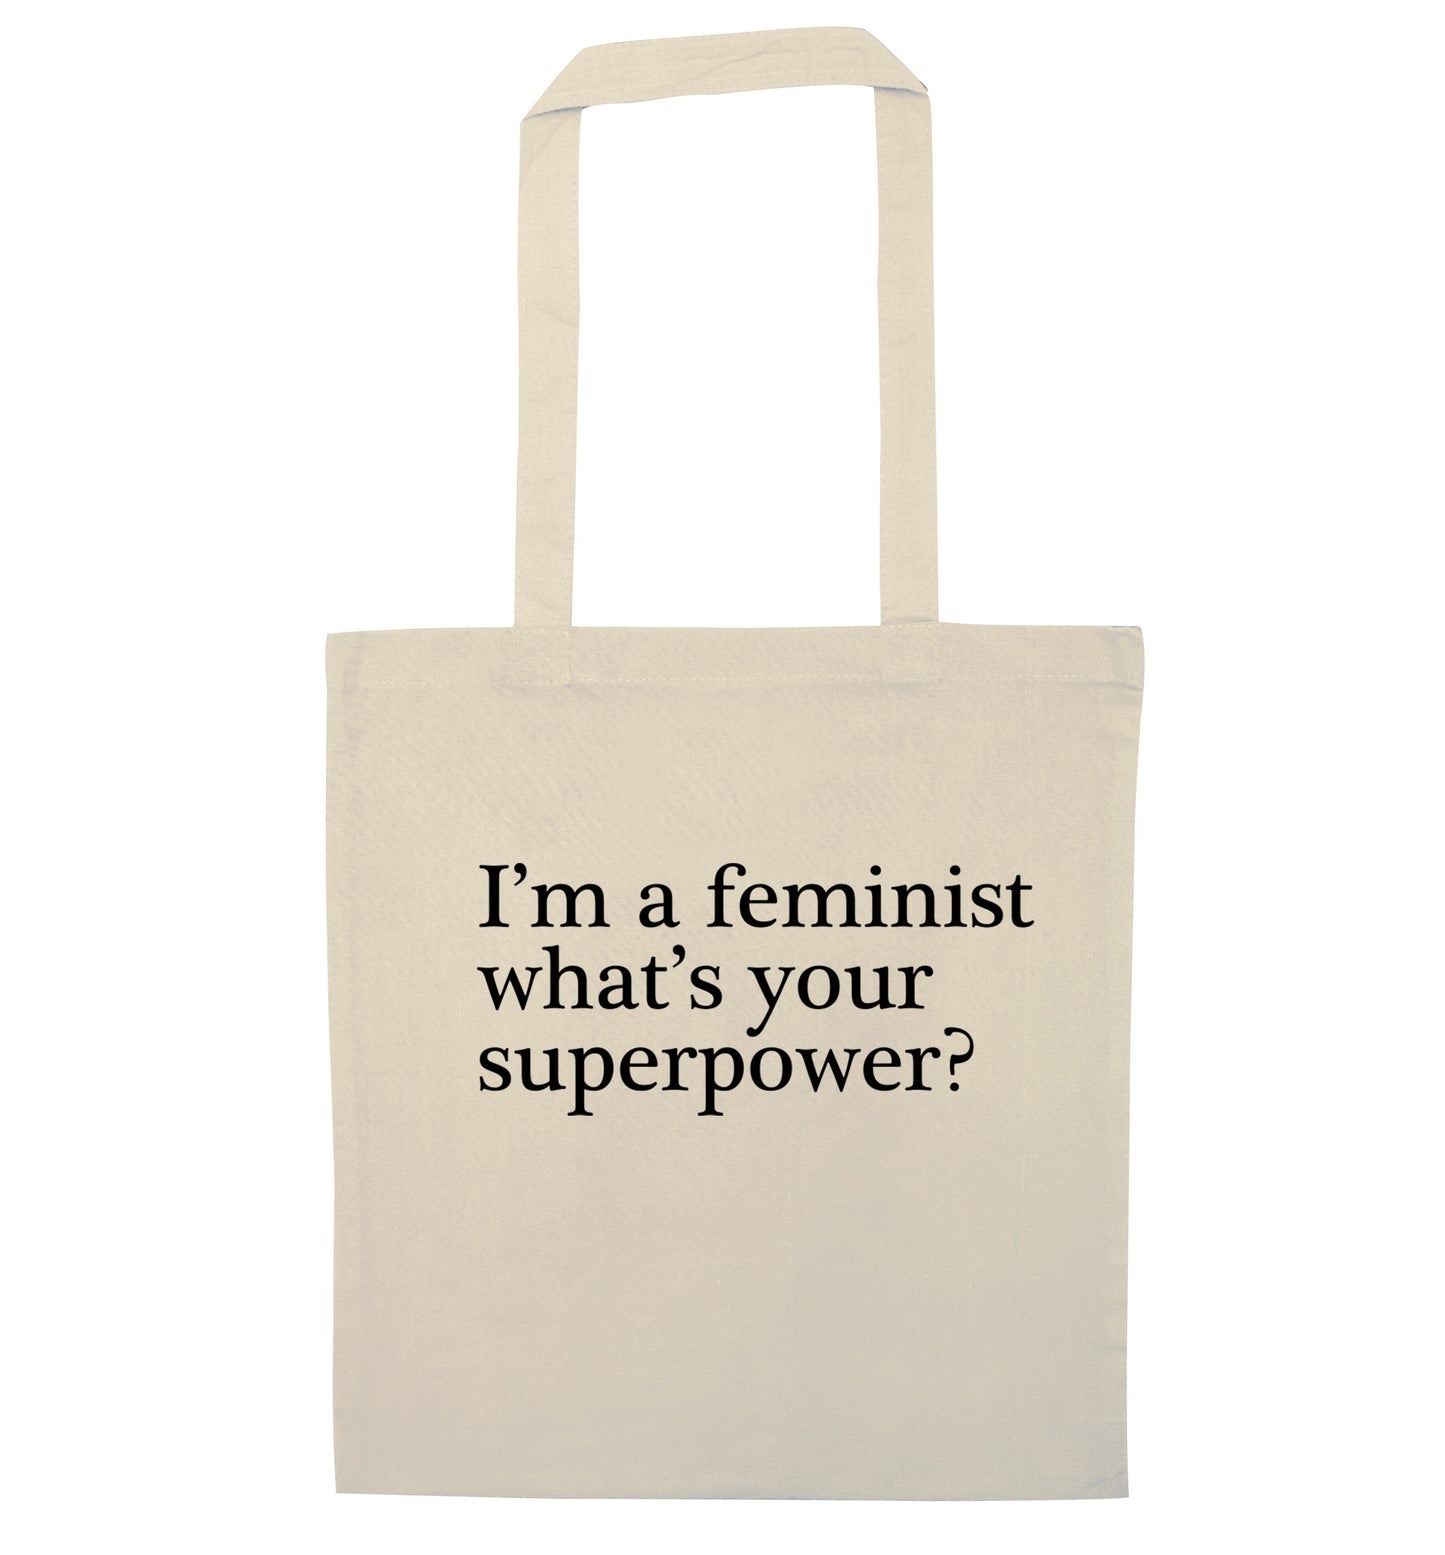 I'm a feminist what's your superpower? natural tote bag